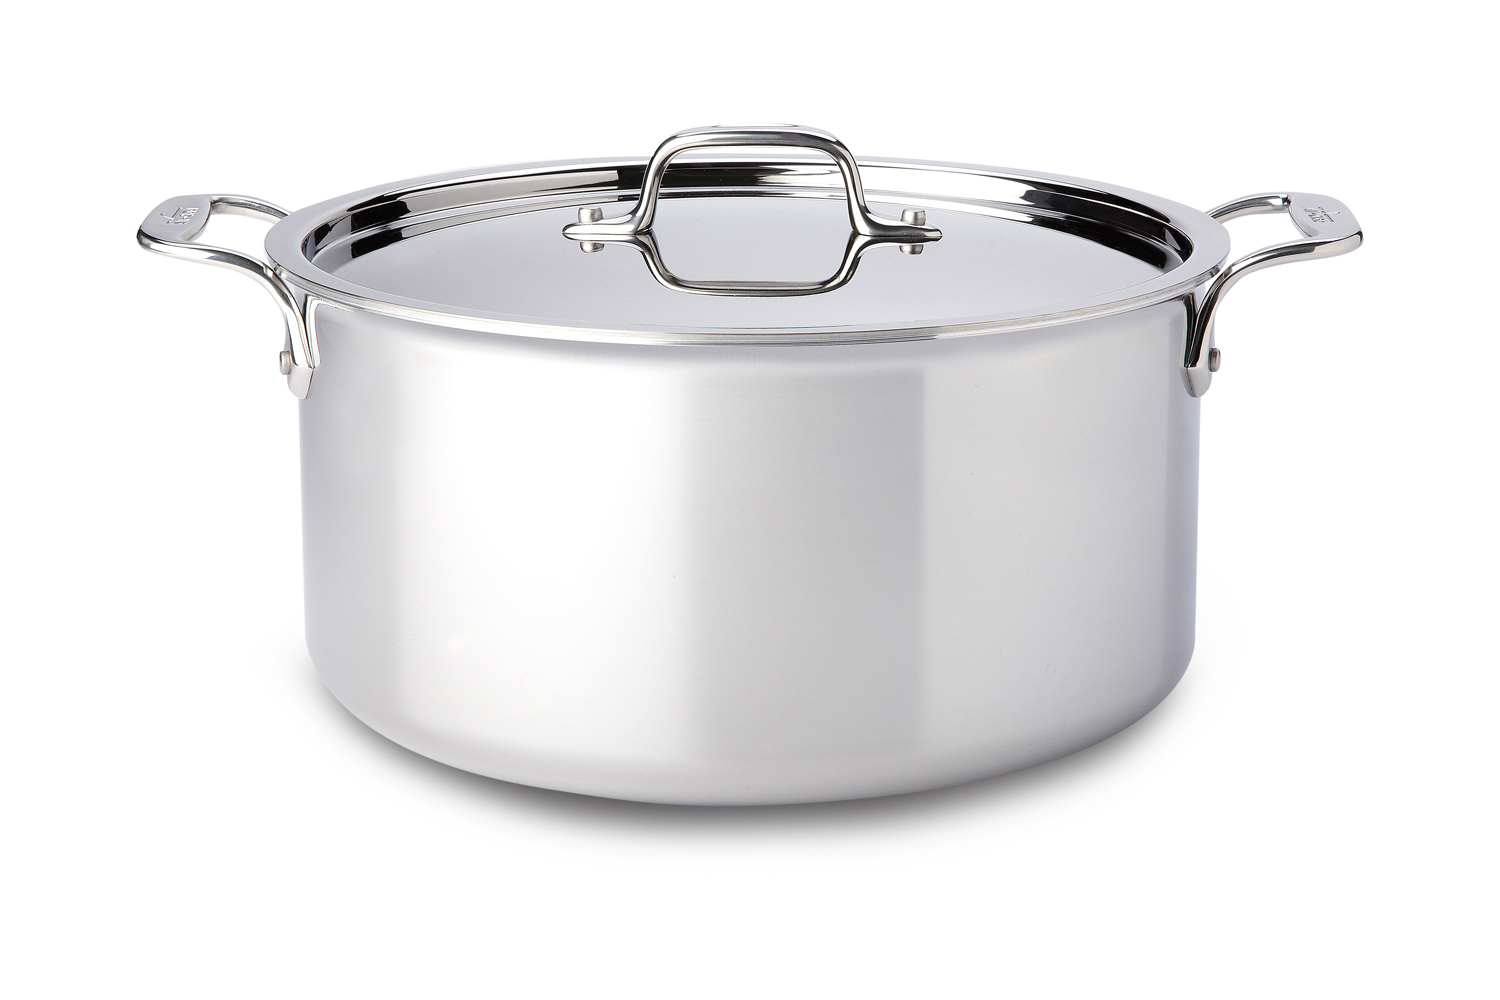 All-clad LTD 8 Quart Stock Pot With Lid, Stainless Steel With Hard Anodized  Outer, Aluminum Core, Handles, Used 